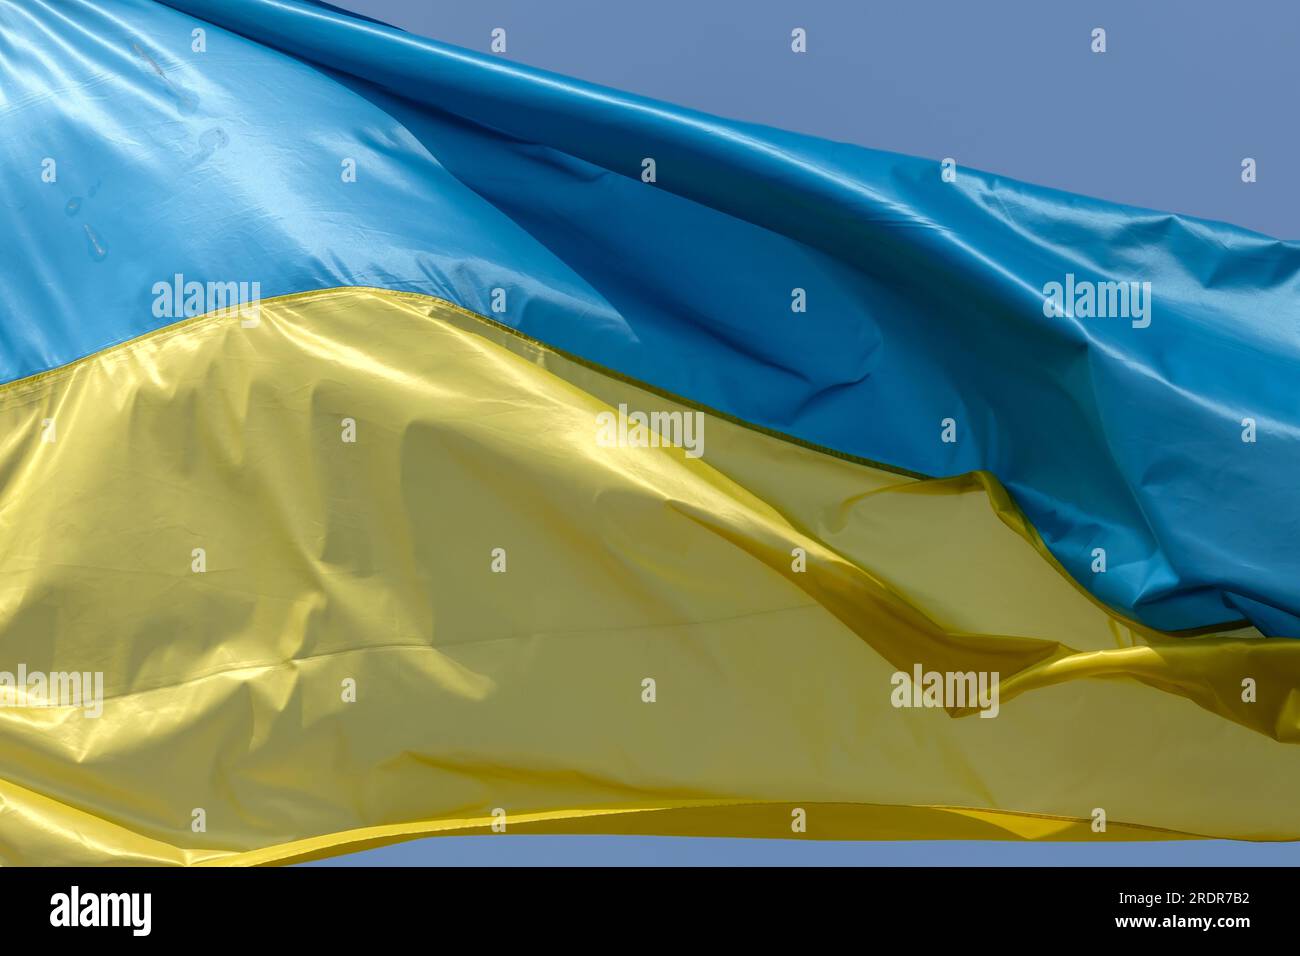 View of the national flag of Ukraine waving in the wind Stock Photo